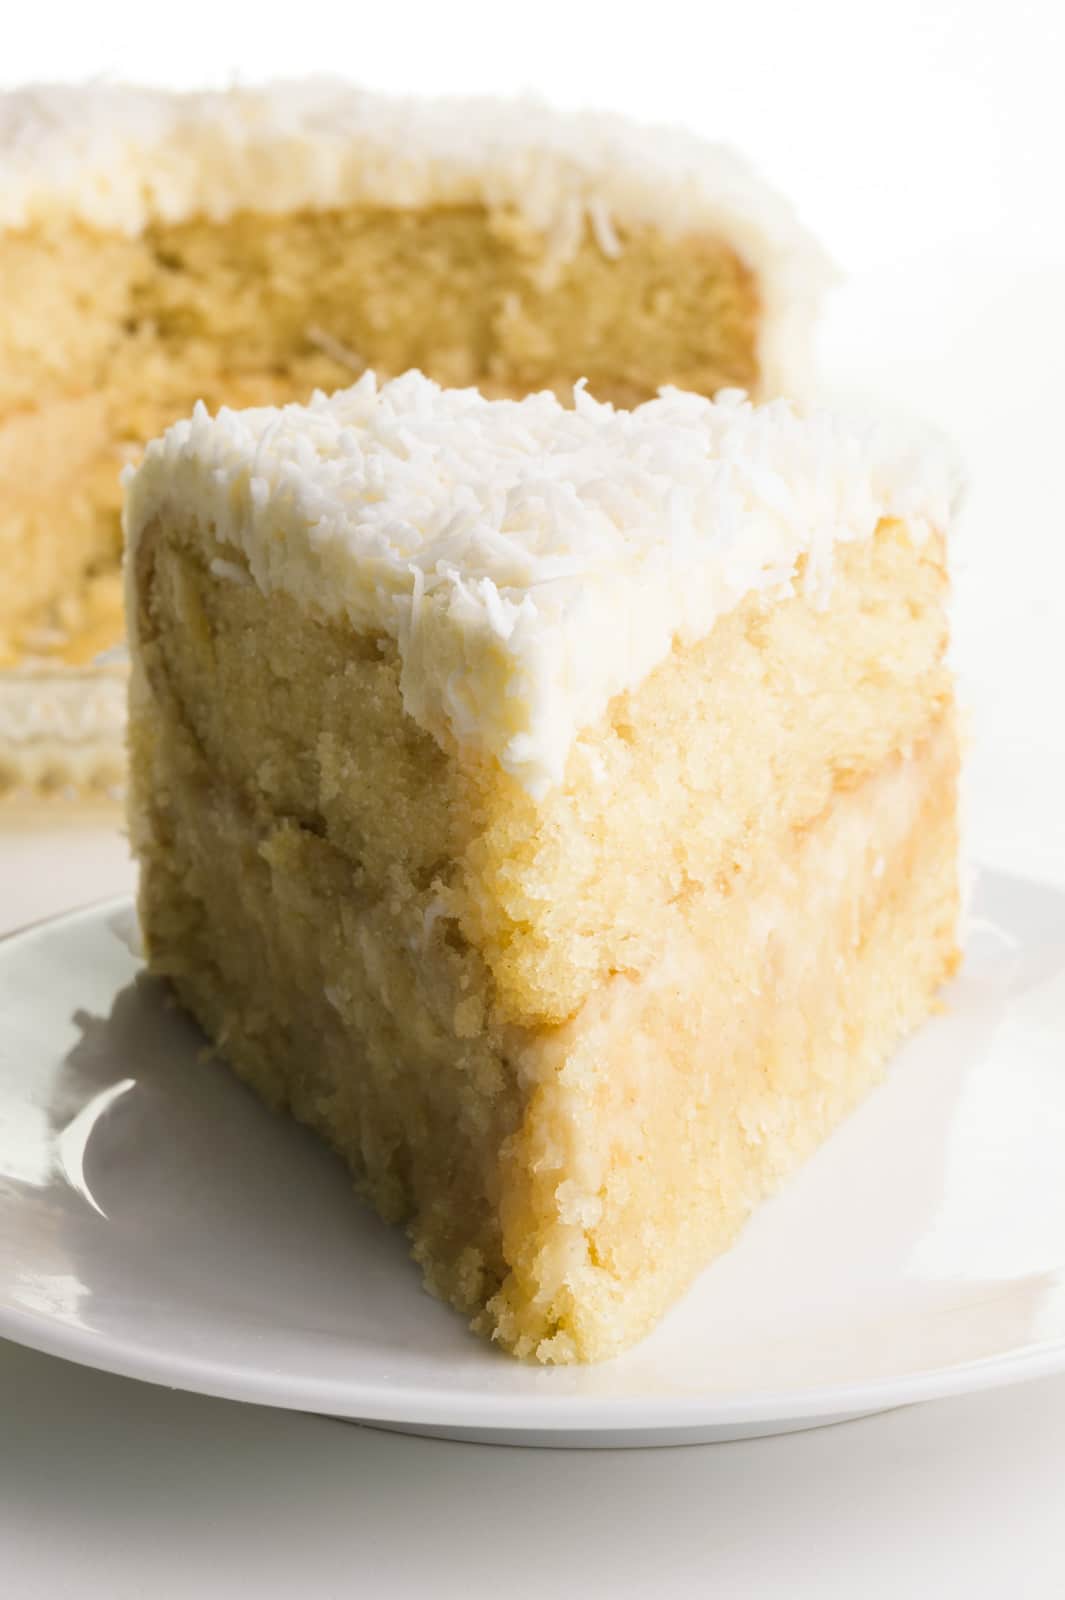 Gluten-free passion fruit and coconut cake recipe | Recipe | Coconut cake, Coconut  cake recipe, Flavored rum